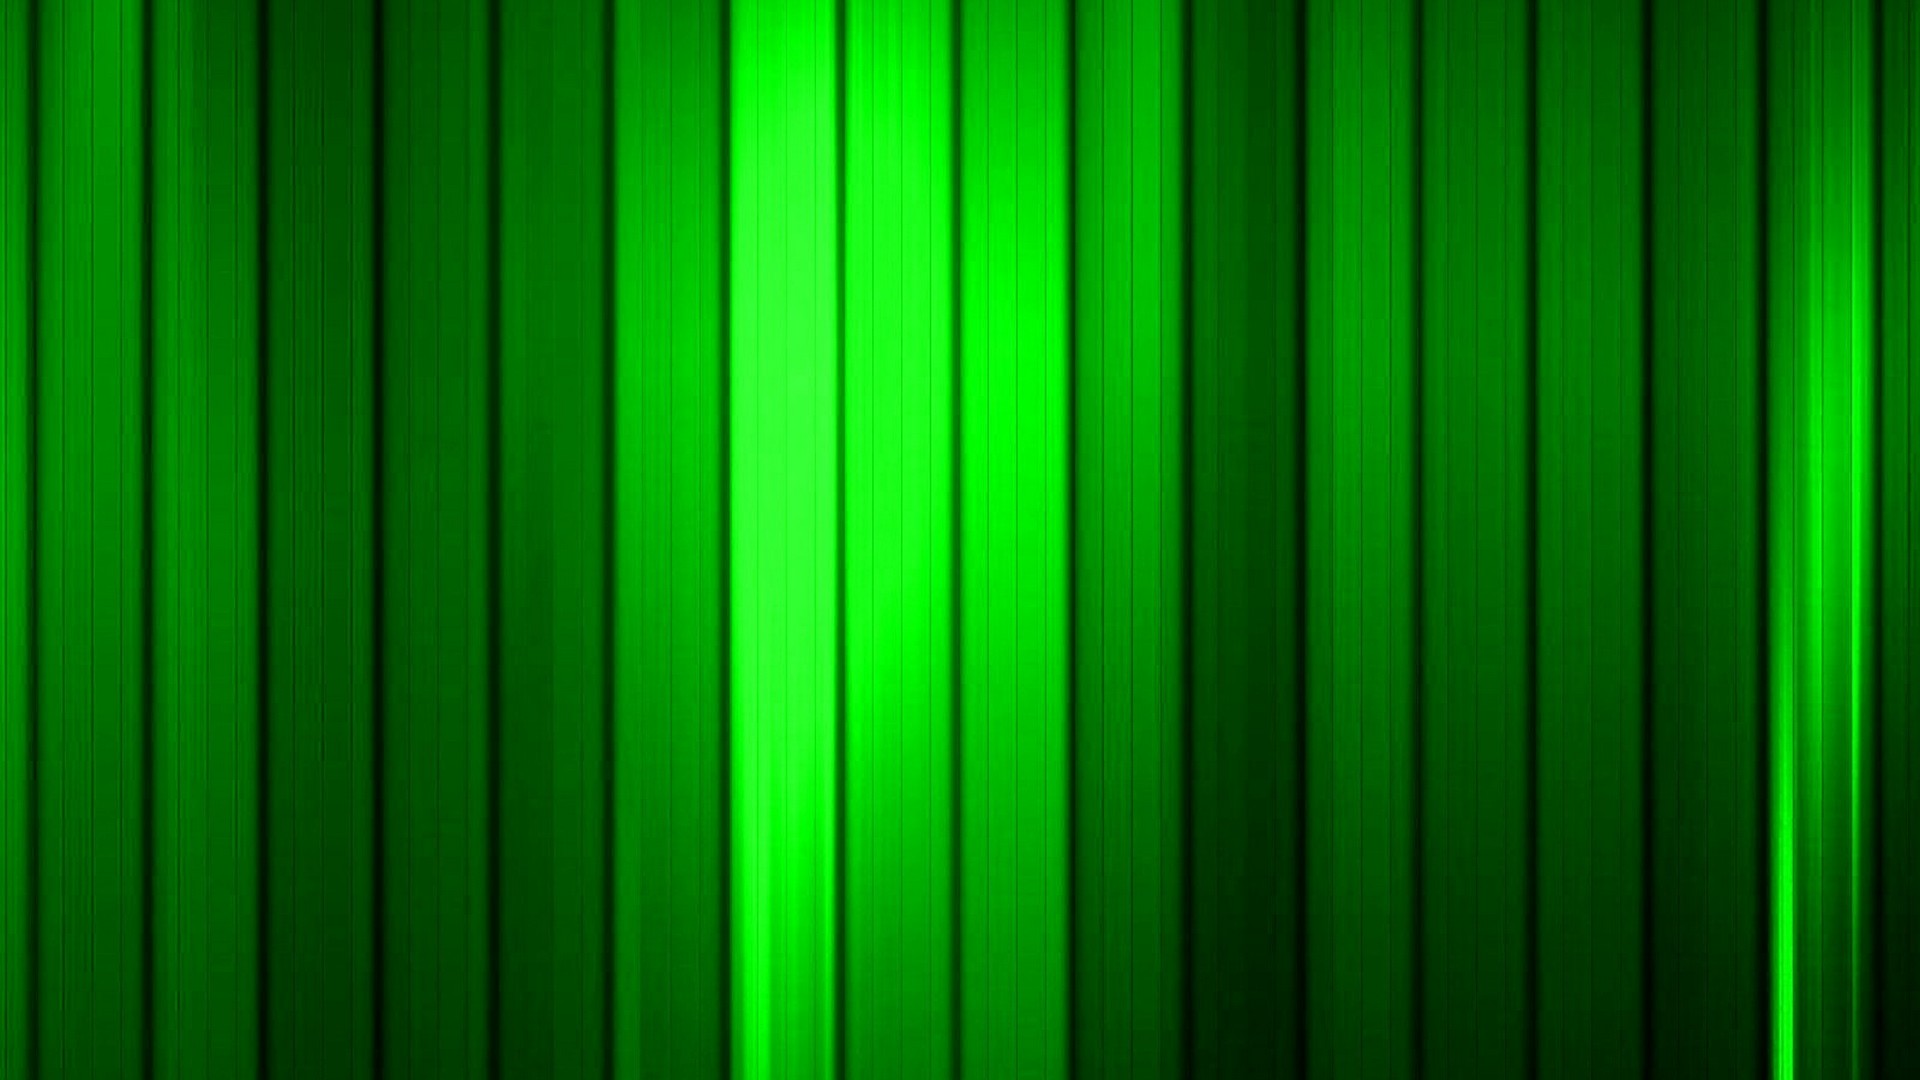 Wallpaper Green Neon Desktop with image resolution 1920x1080 pixel. You can use this wallpaper as background for your desktop Computer Screensavers, Android or iPhone smartphones